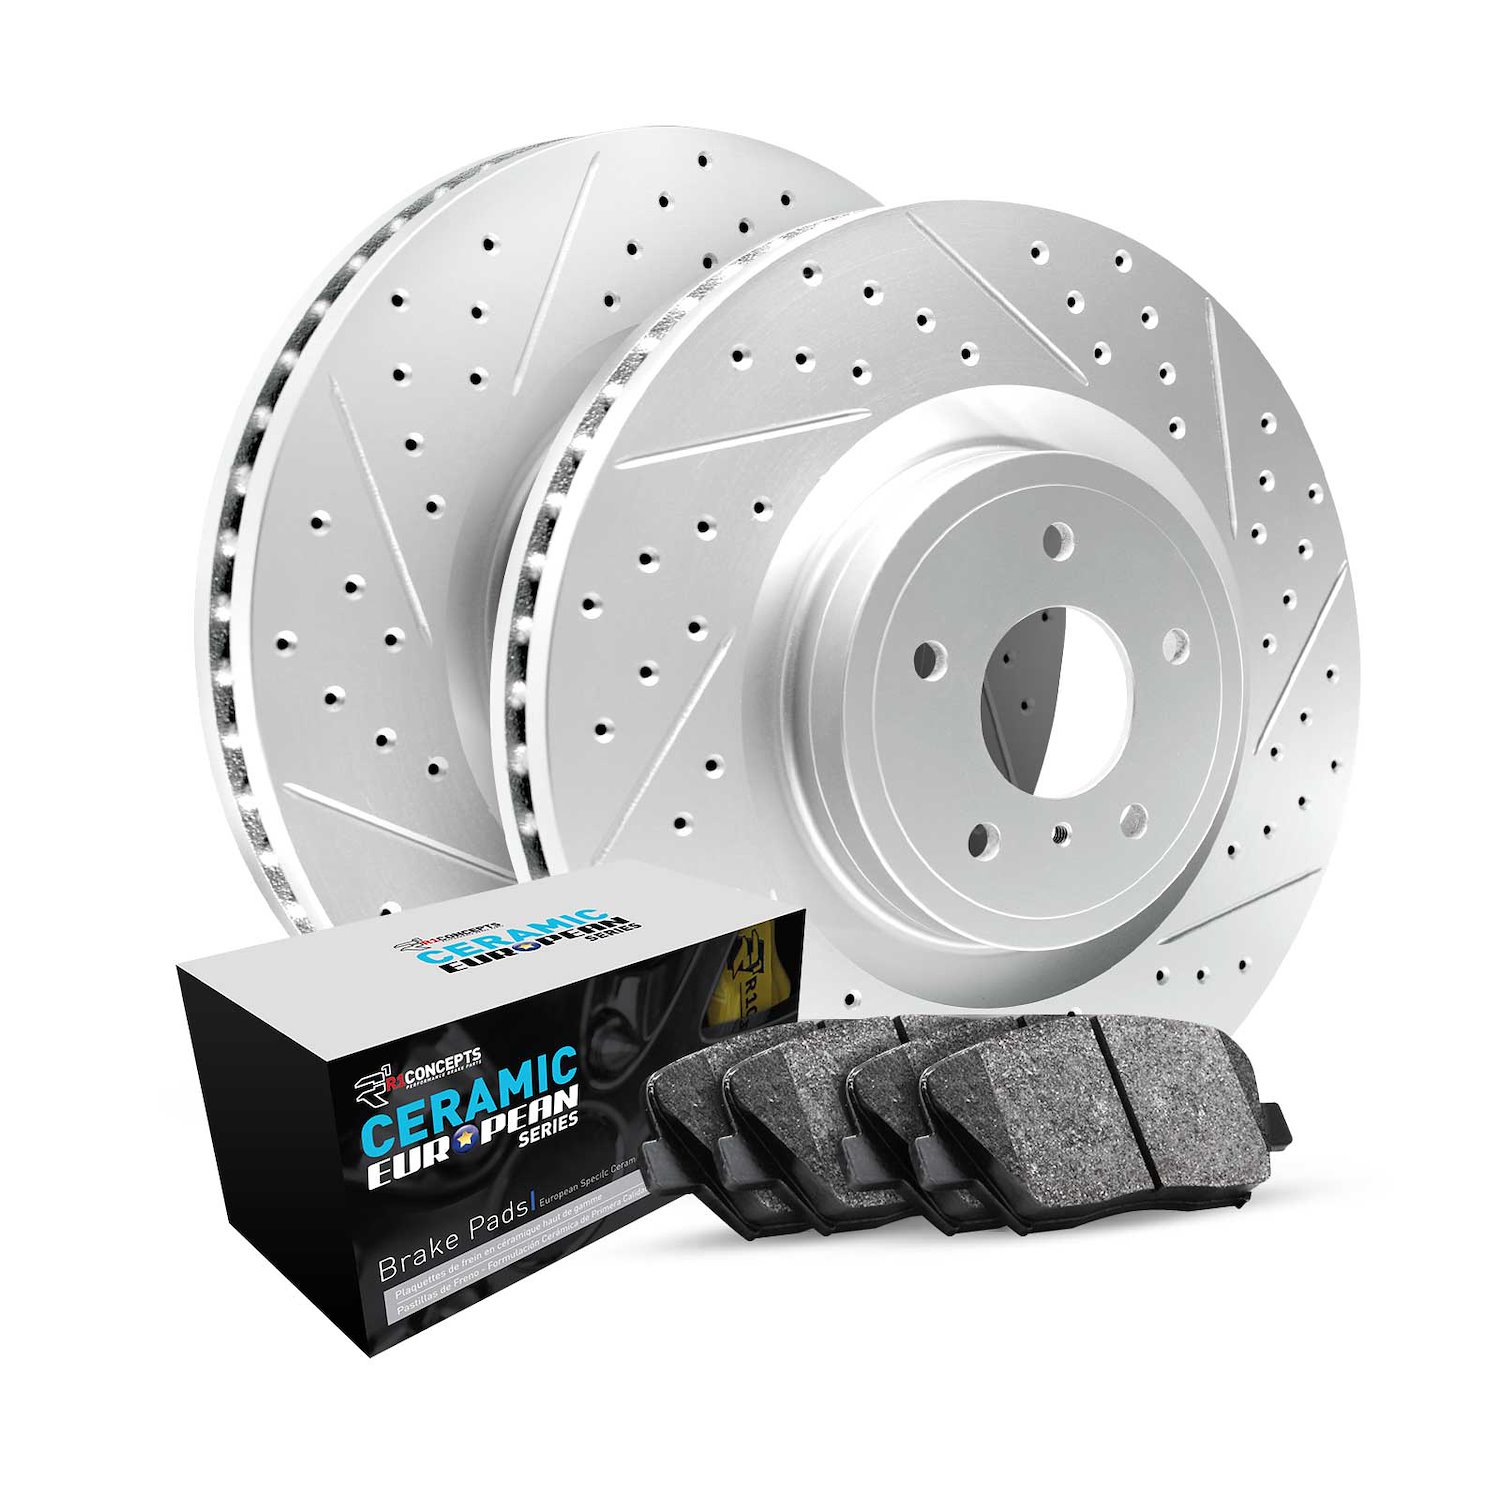 GEO-Carbon Drilled/Slotted Rotors w/Euro Ceramic Pads, Fits